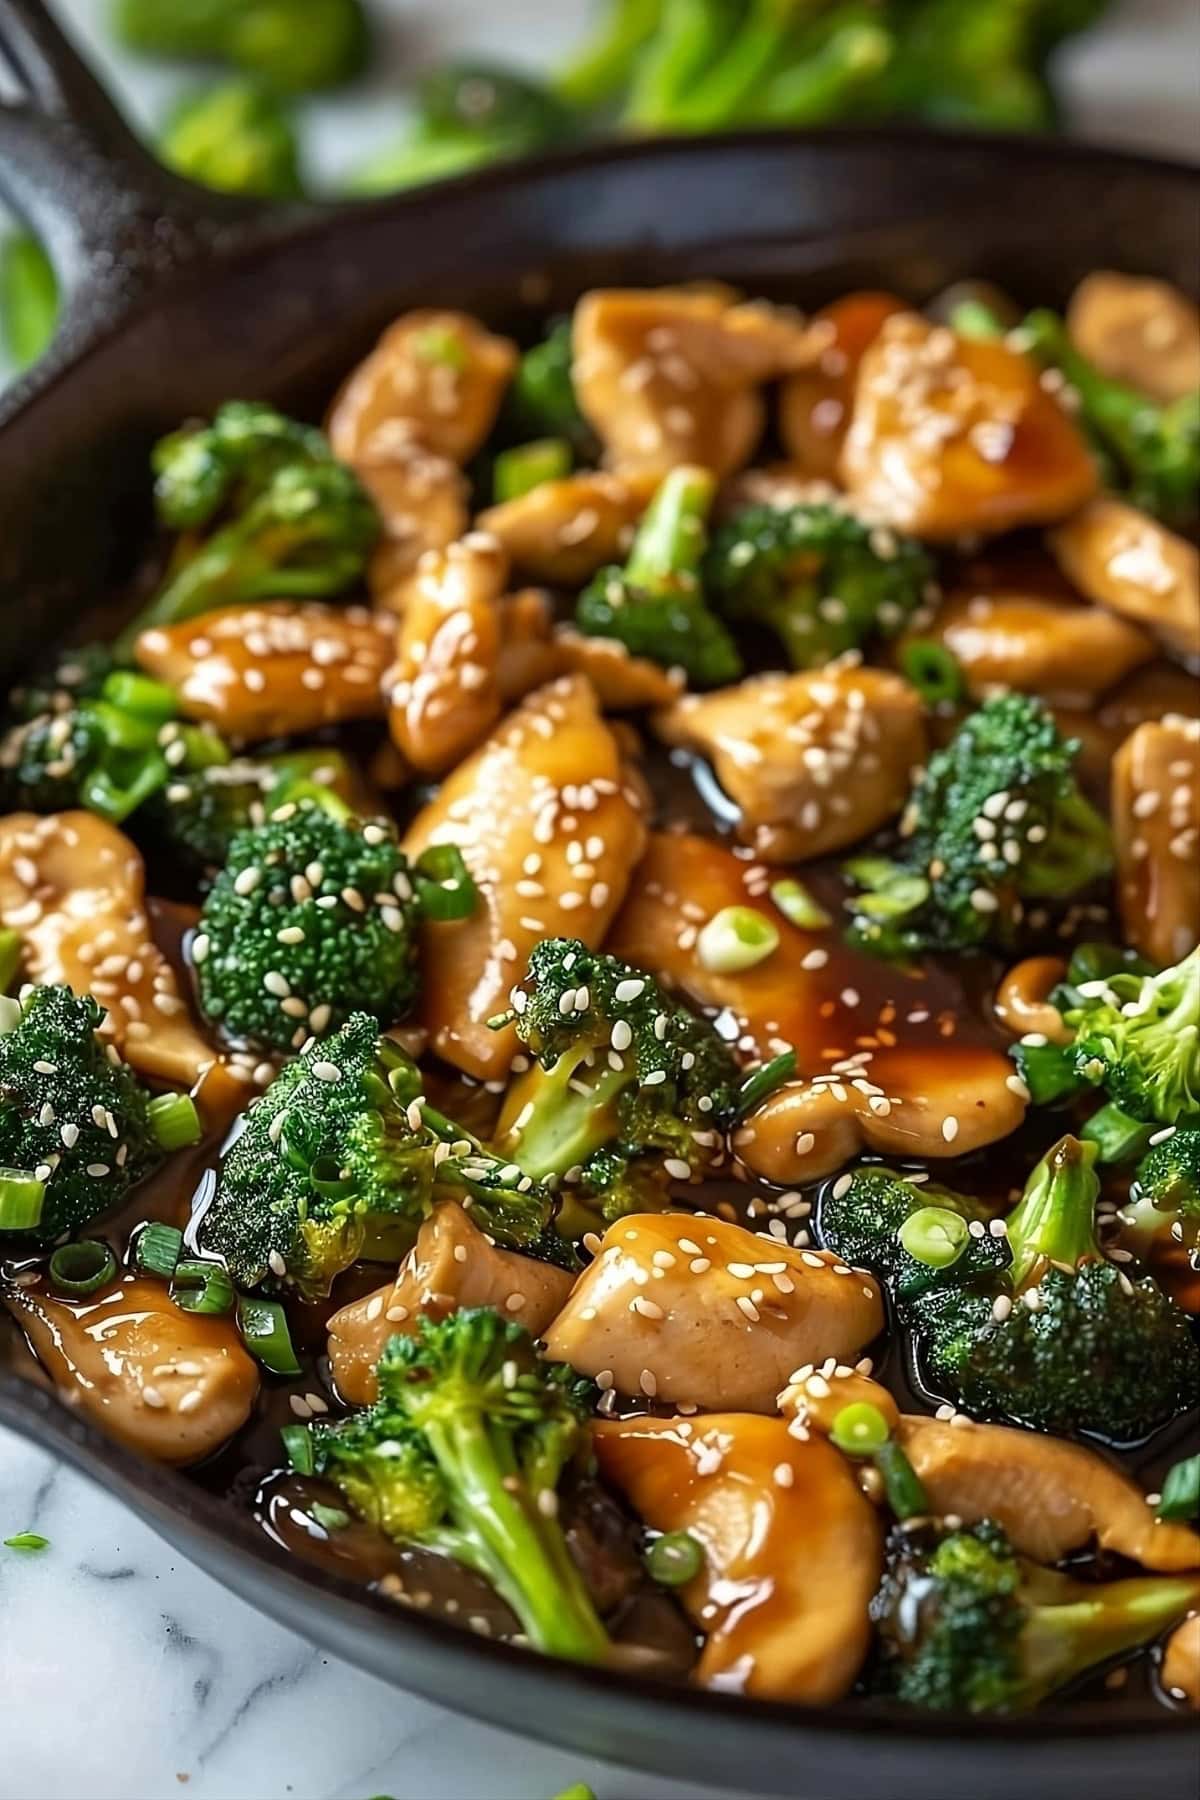 Chicken and broccoli in a cast iron pan with sauce   made with chicken broth, oyster sauce, soy sauce, rice wine vinegar, brown sugar, sesame oil, and cornstarch.
